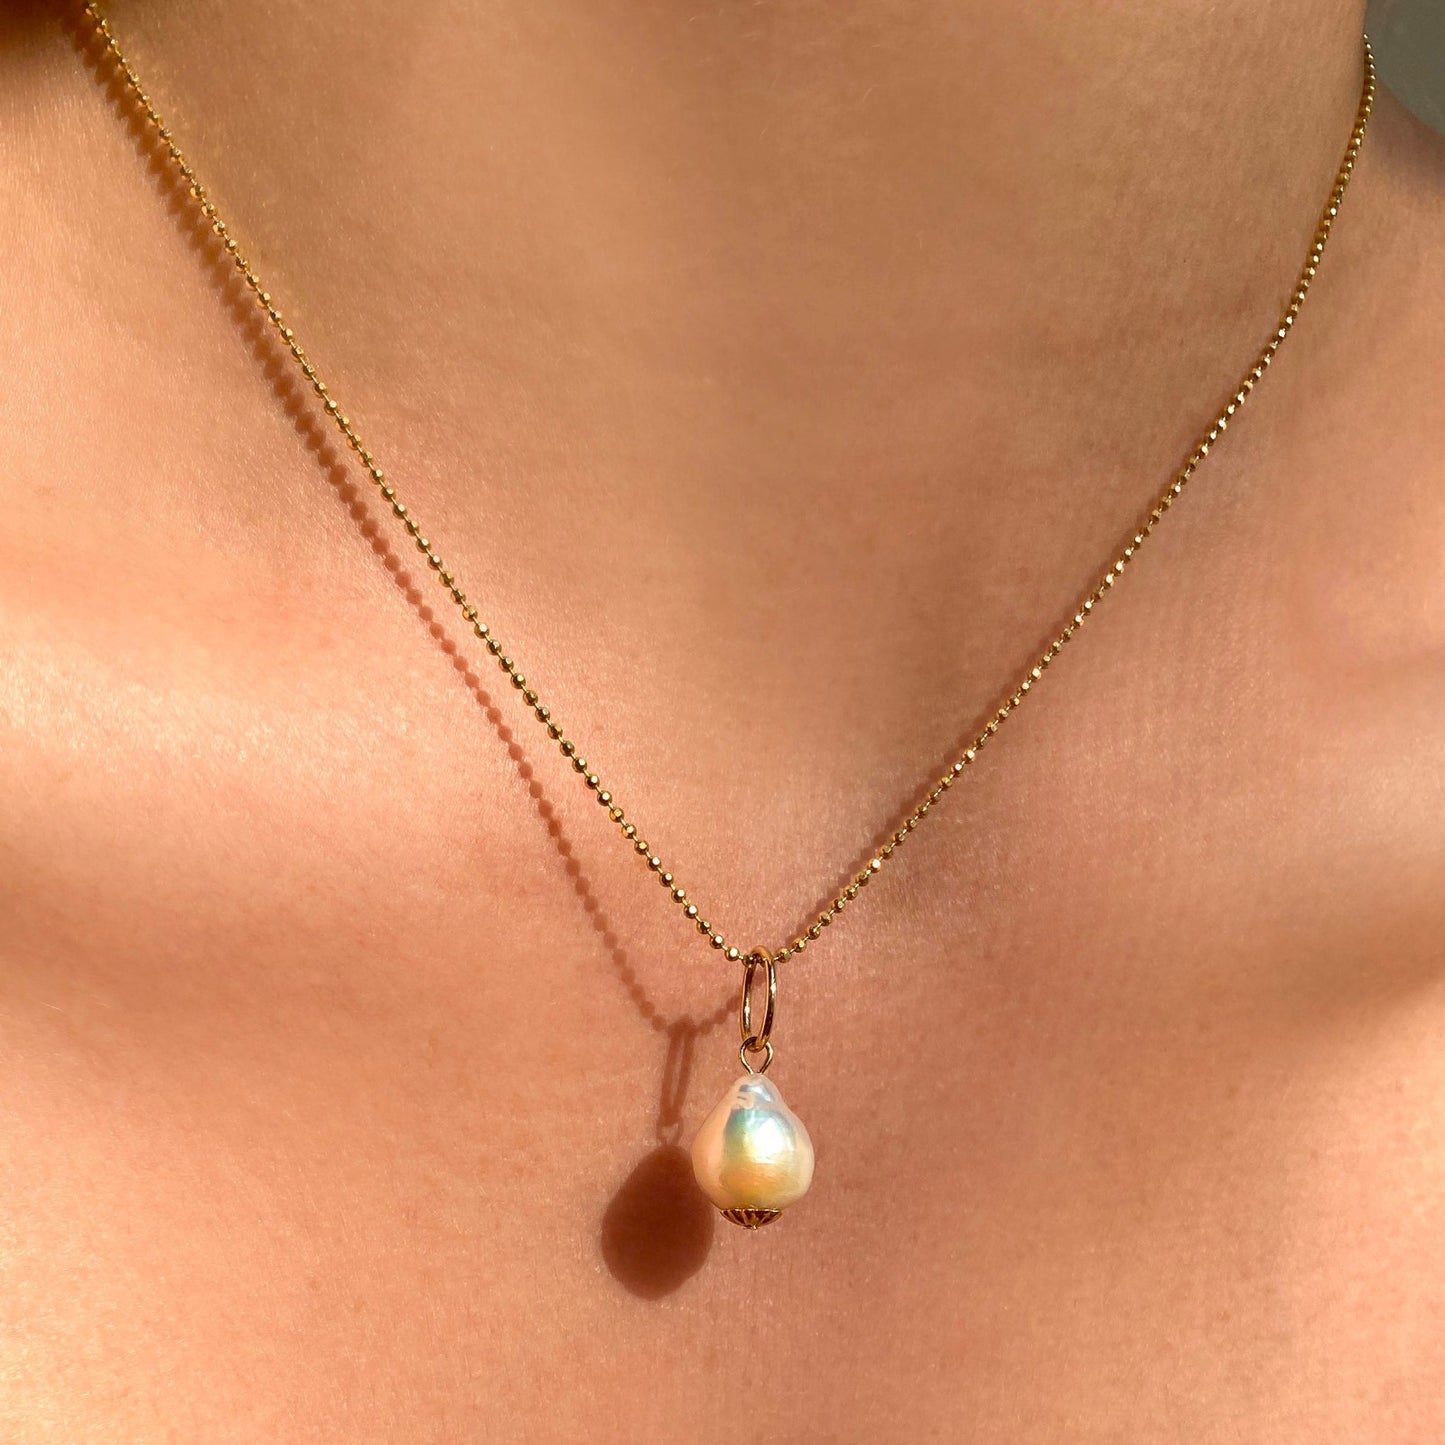 Mini Baroque Pearl Charm. Styled on a neck hanging from a diamond cut bead chain necklace.